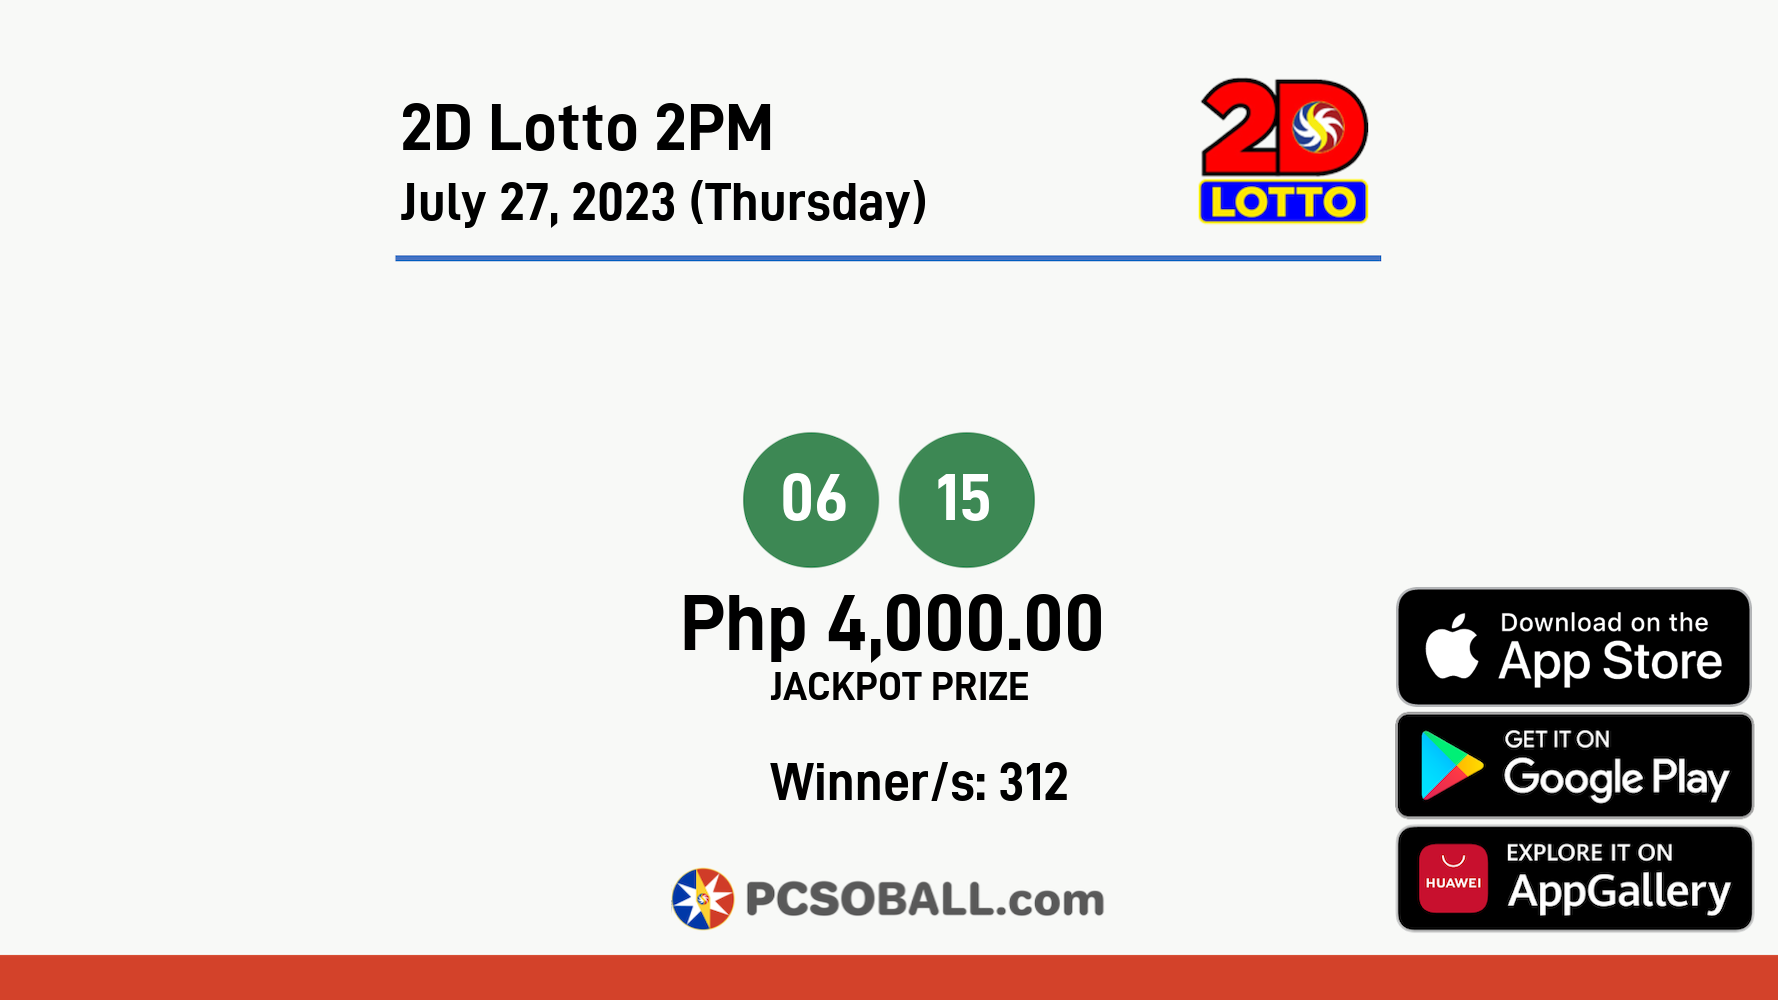 2D Lotto 2PM July 27, 2023 (Thursday) Result